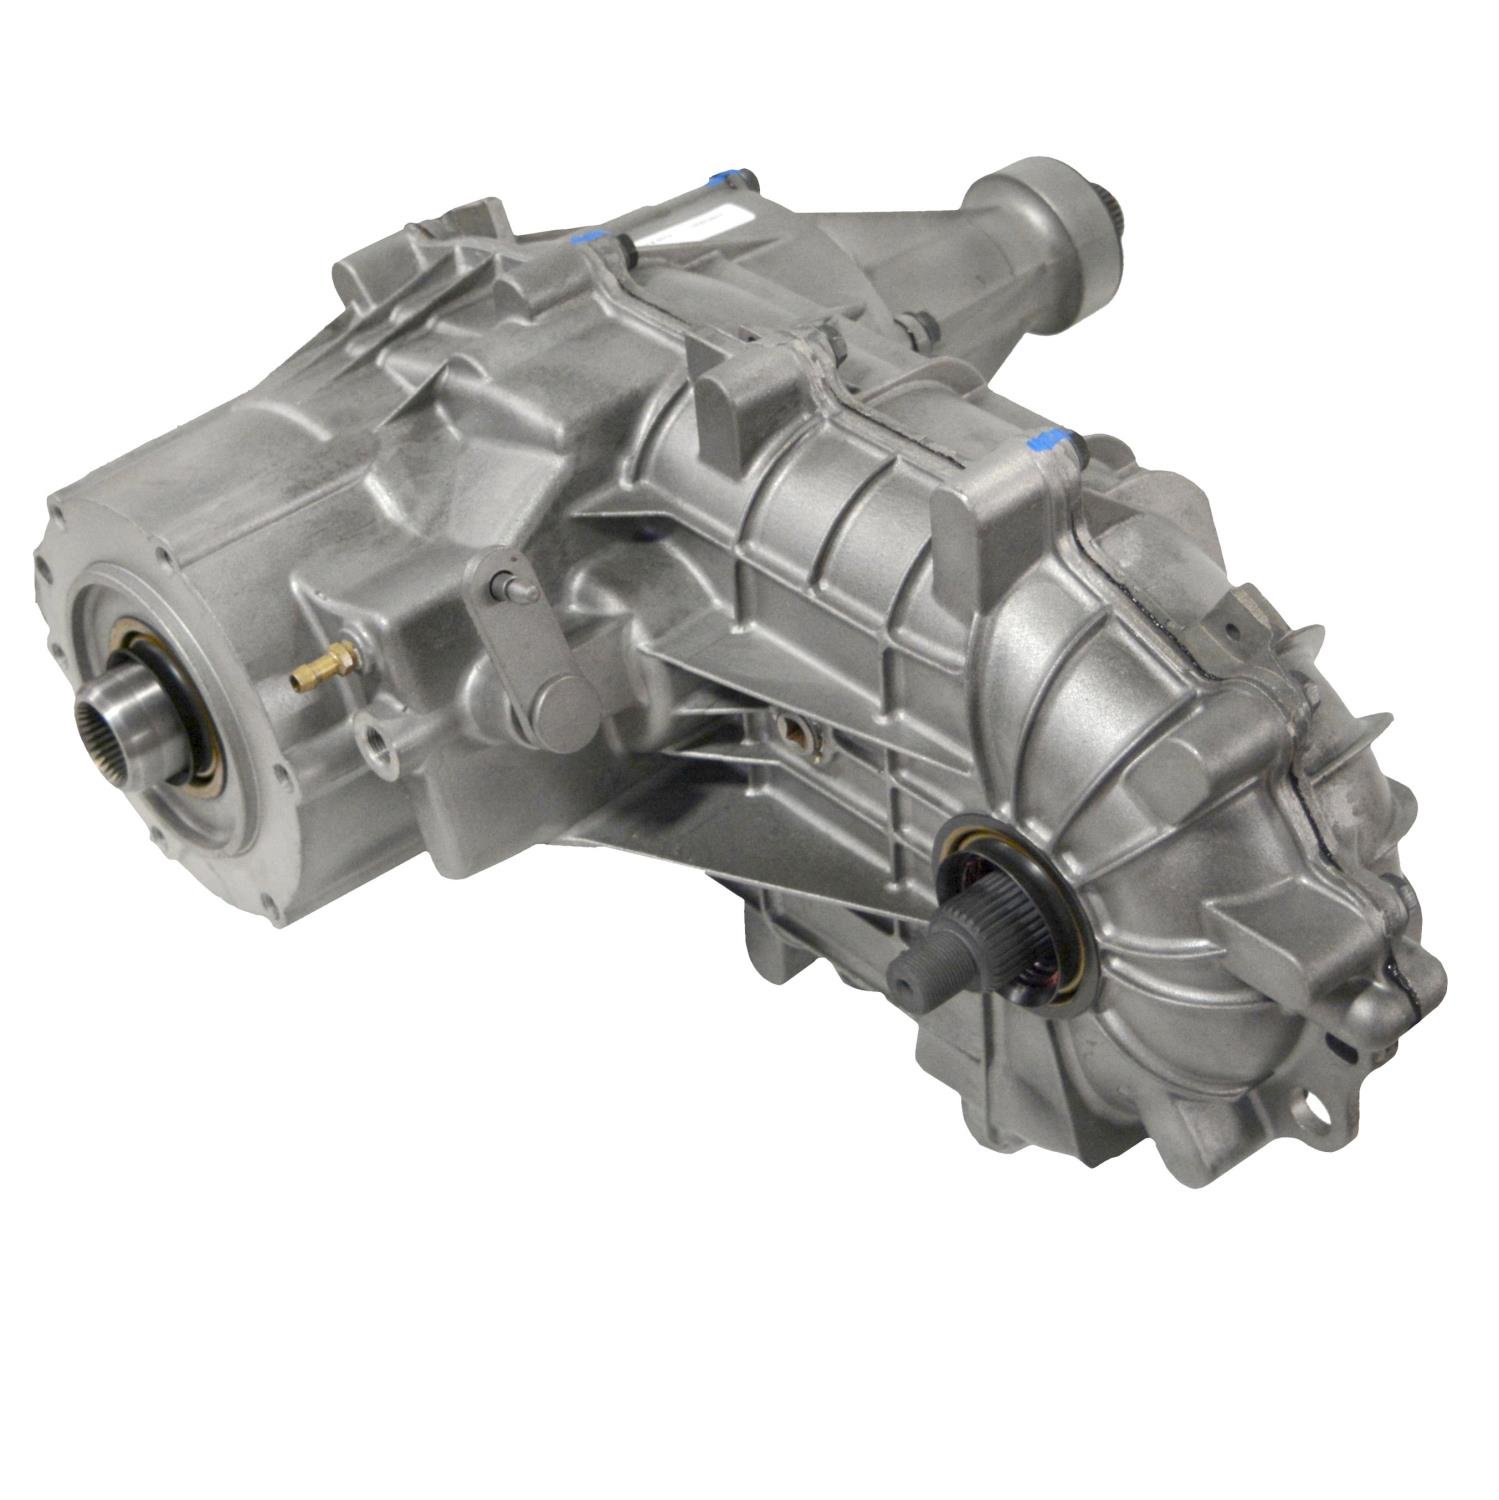 Remanufactured BW1356 Transfer Case, 1989-1992 Ford